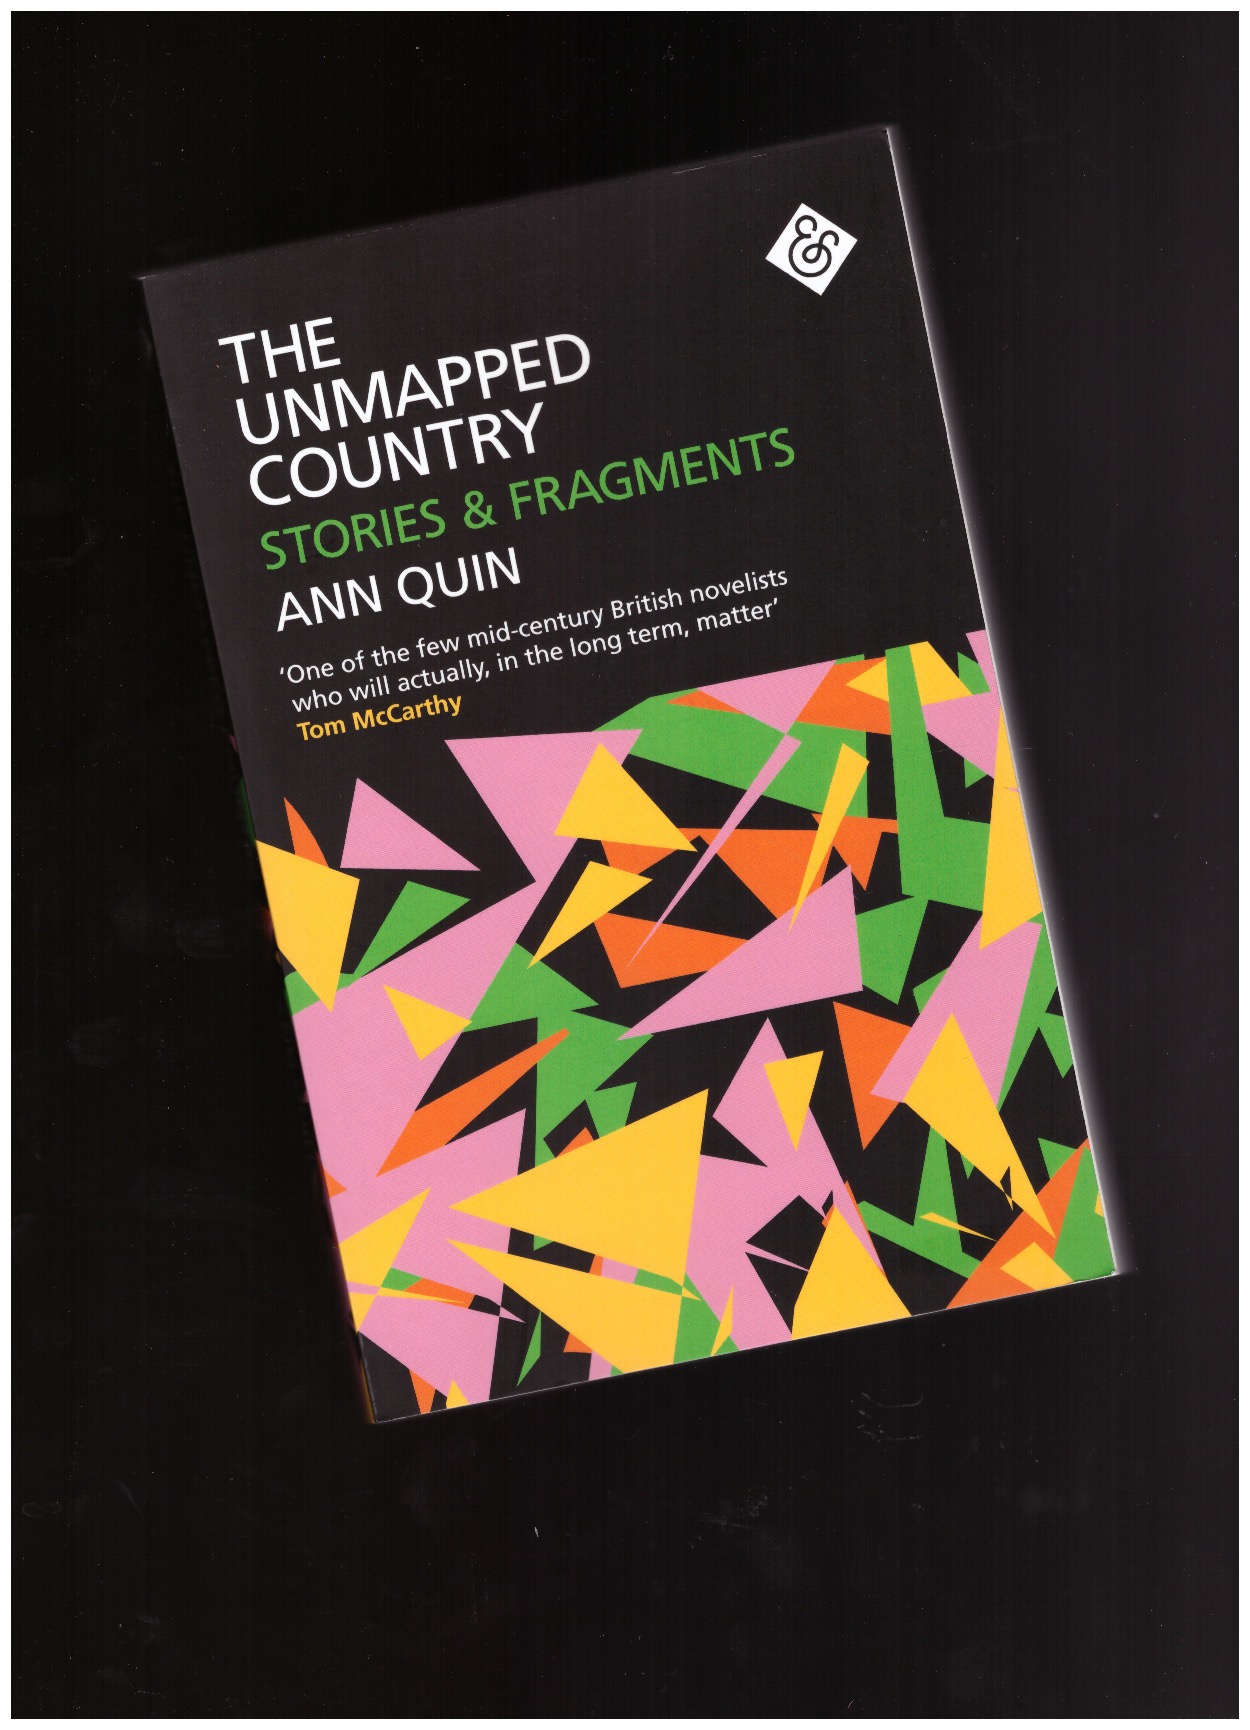 QUIN, Ann - The Unmapped Country: Stories and Fragments